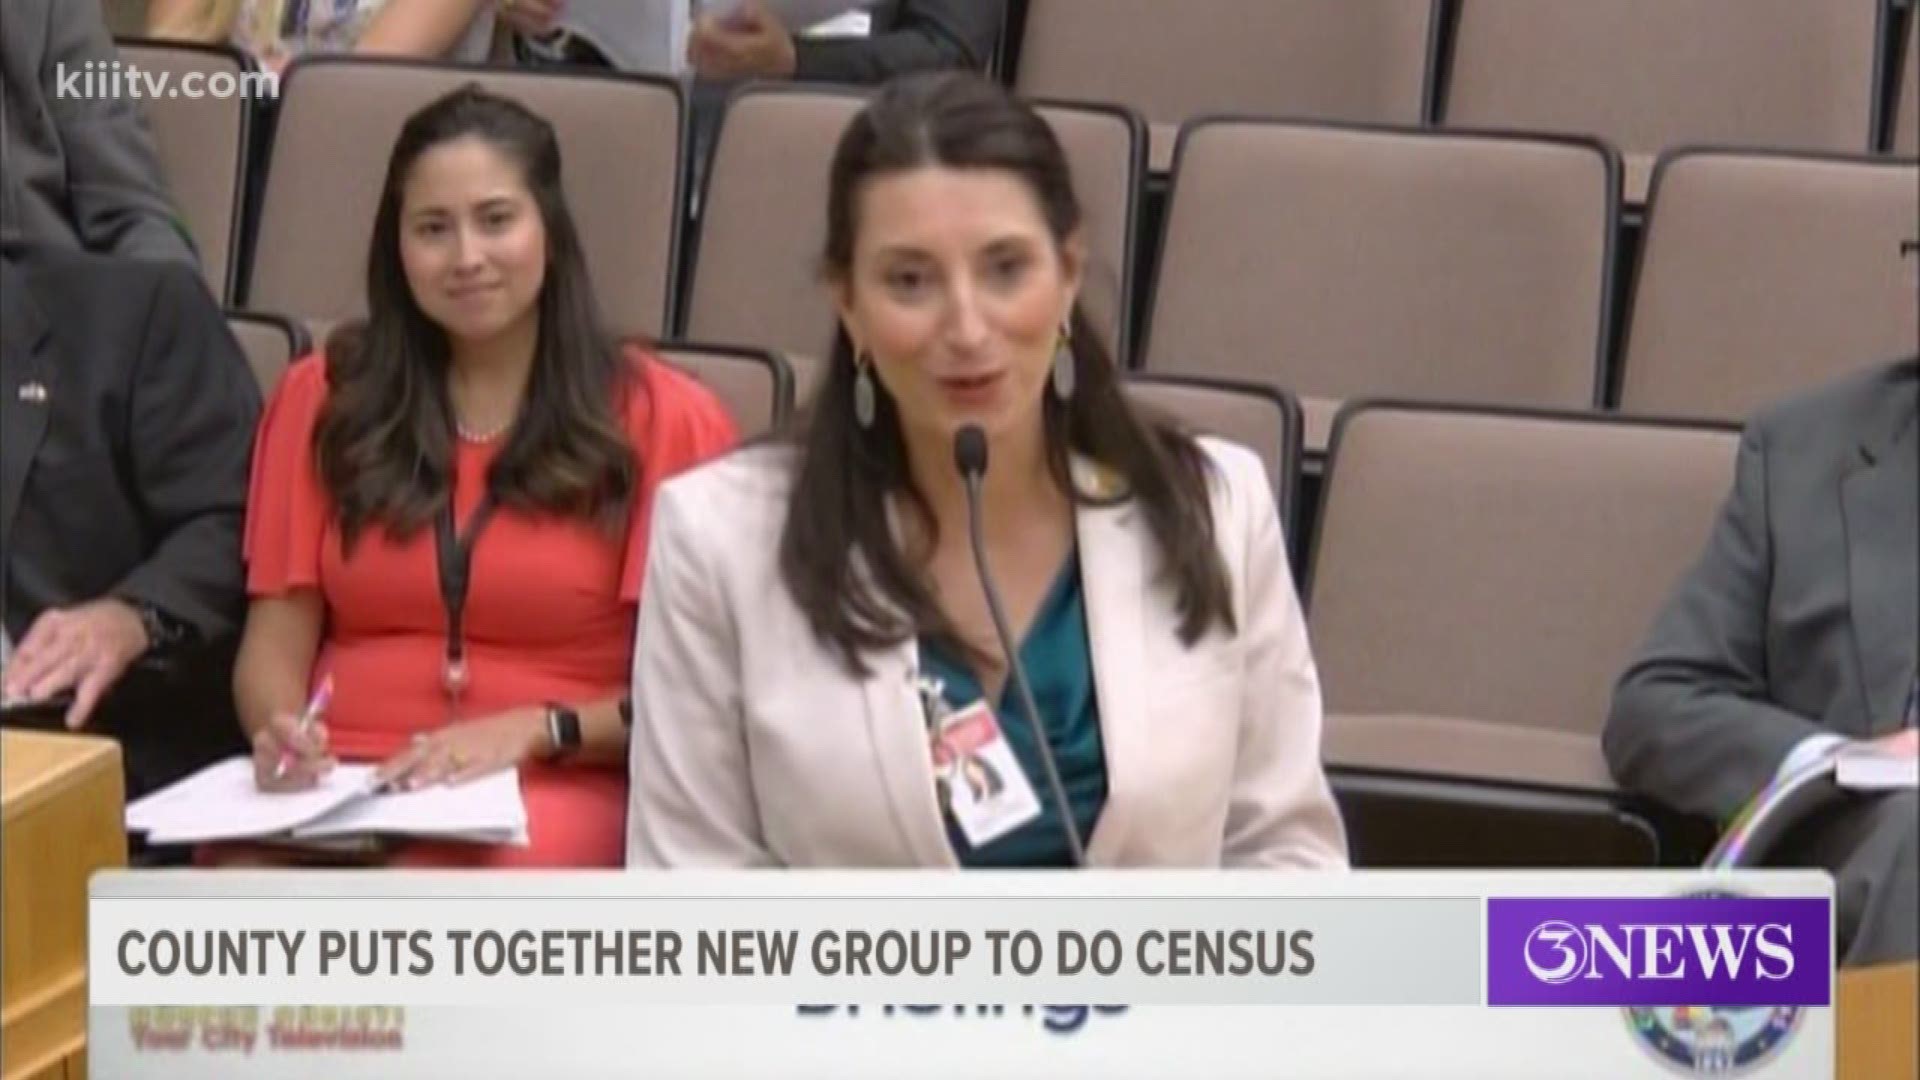 Every 10 years since 1790, there has been a census count, and currently Nueces County officials are working on getting read for census 2020.